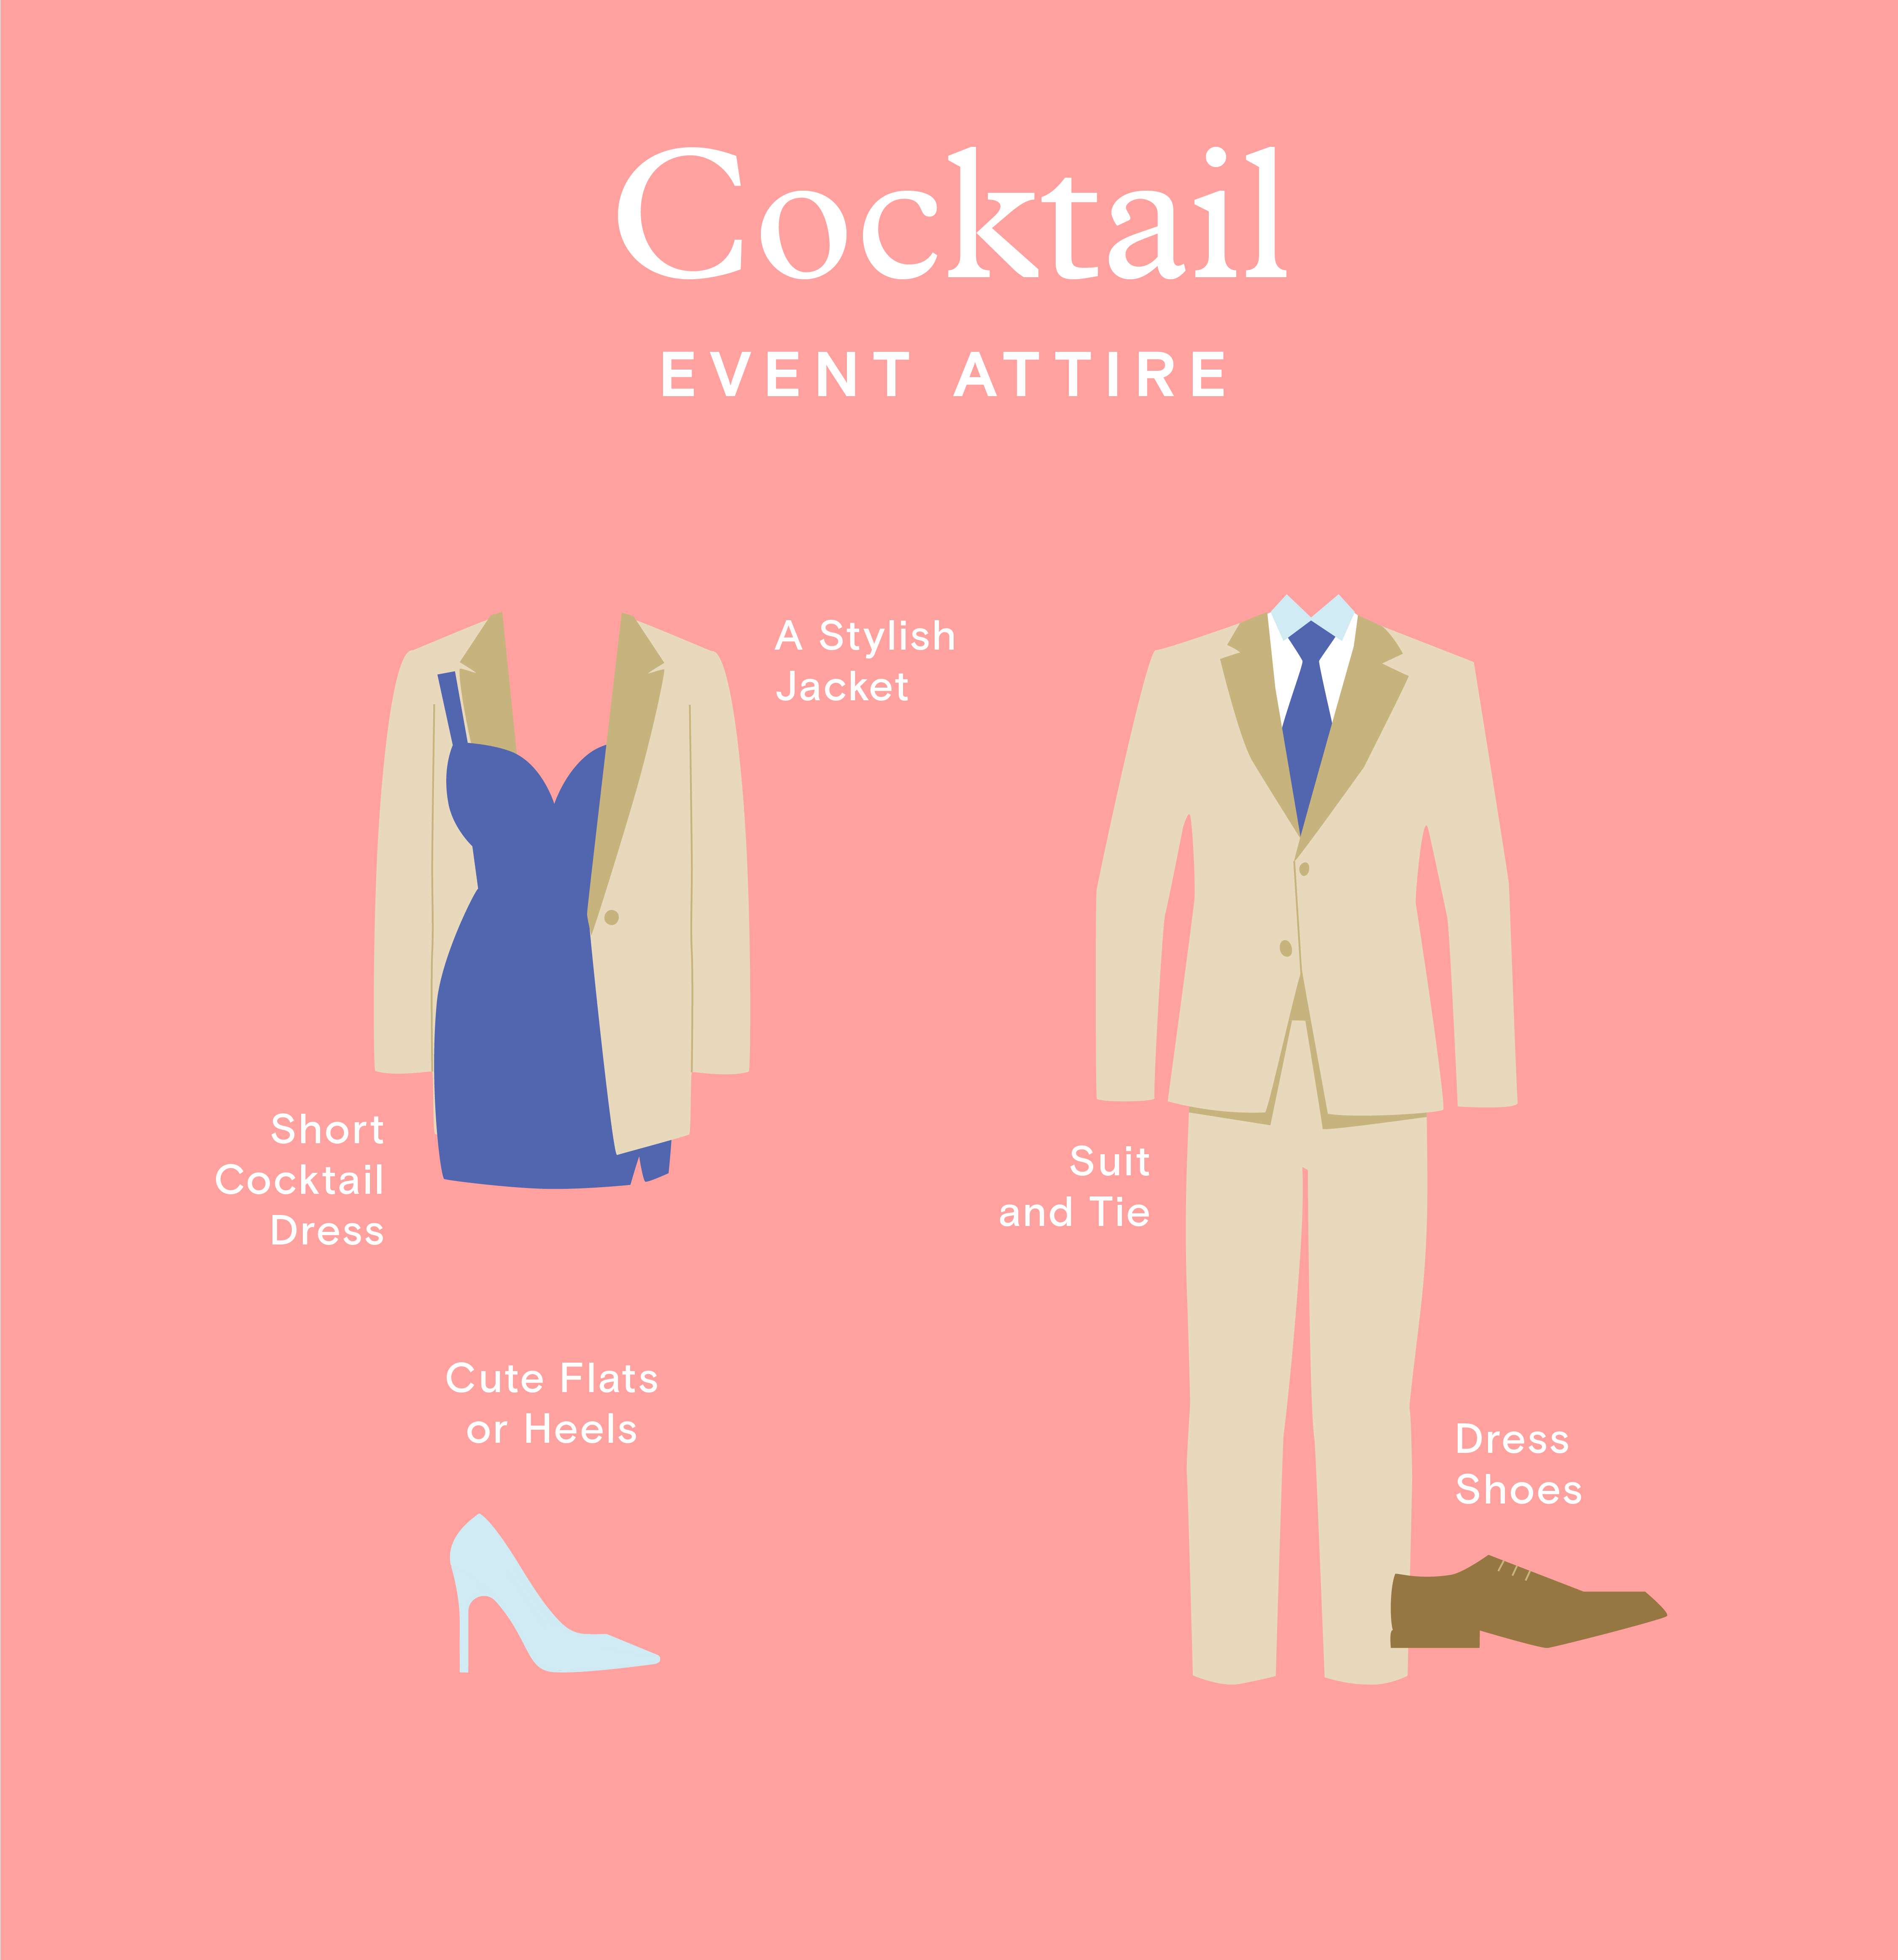 Wedding dress codes: What to wear as a wedding guest, explained - Vox